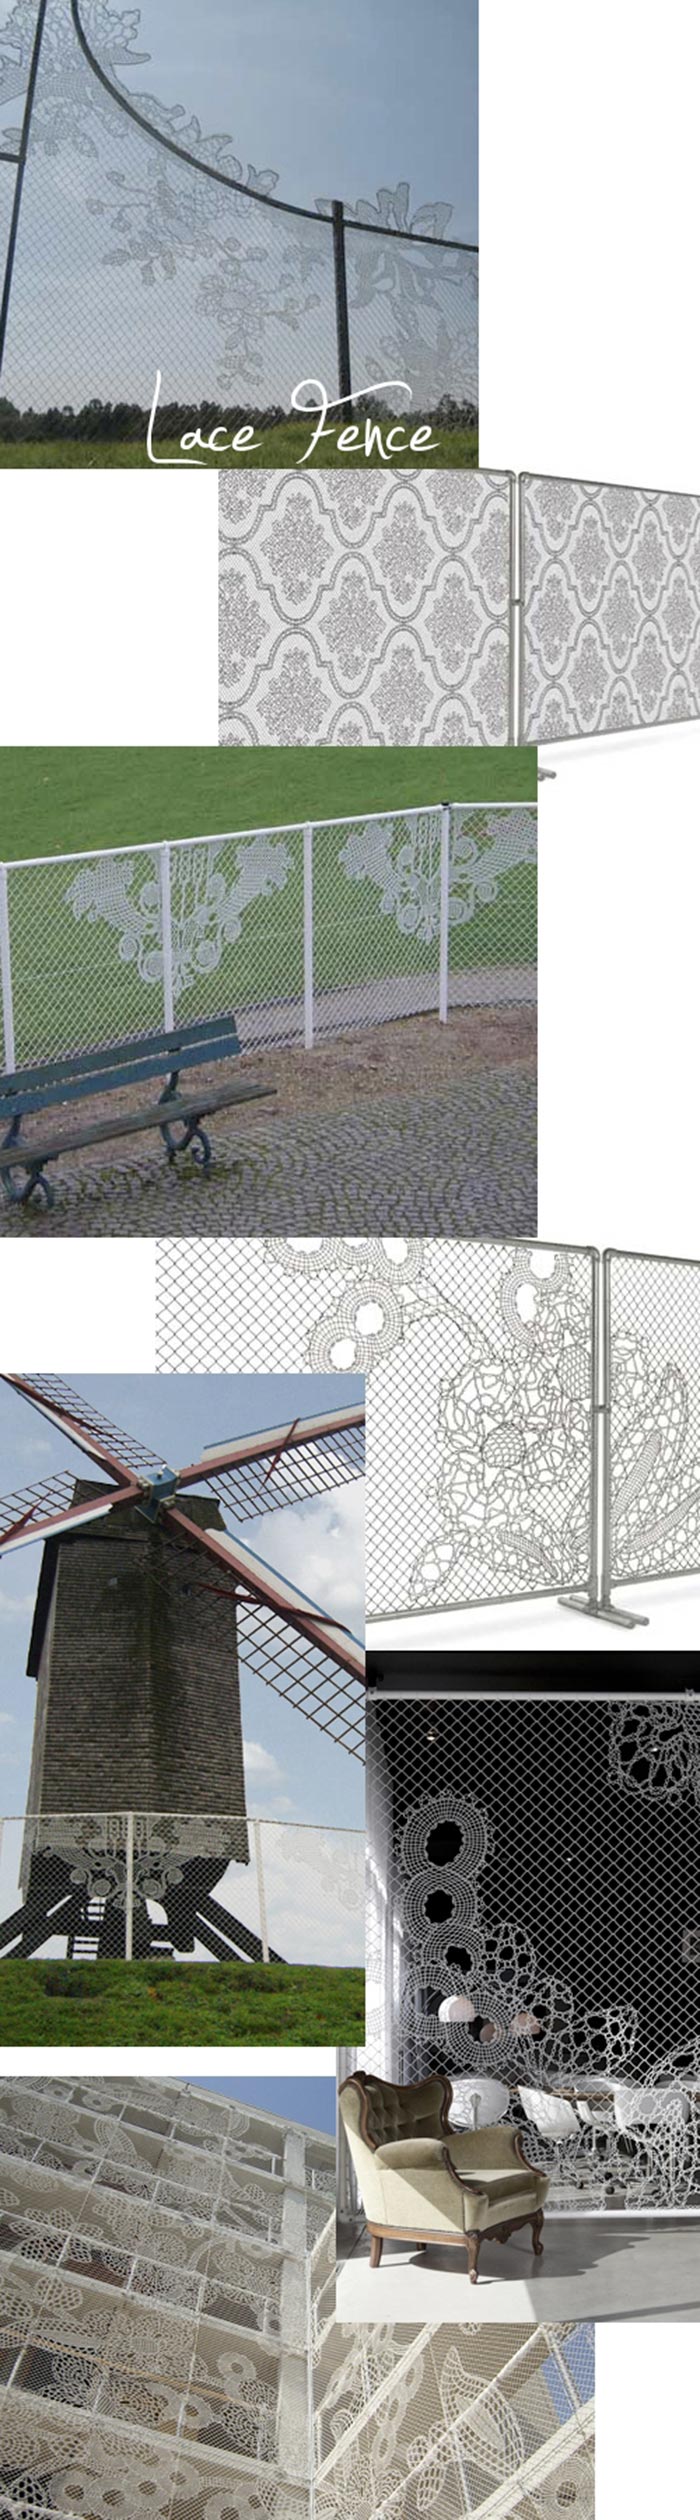 lace fence decorative chain link fence